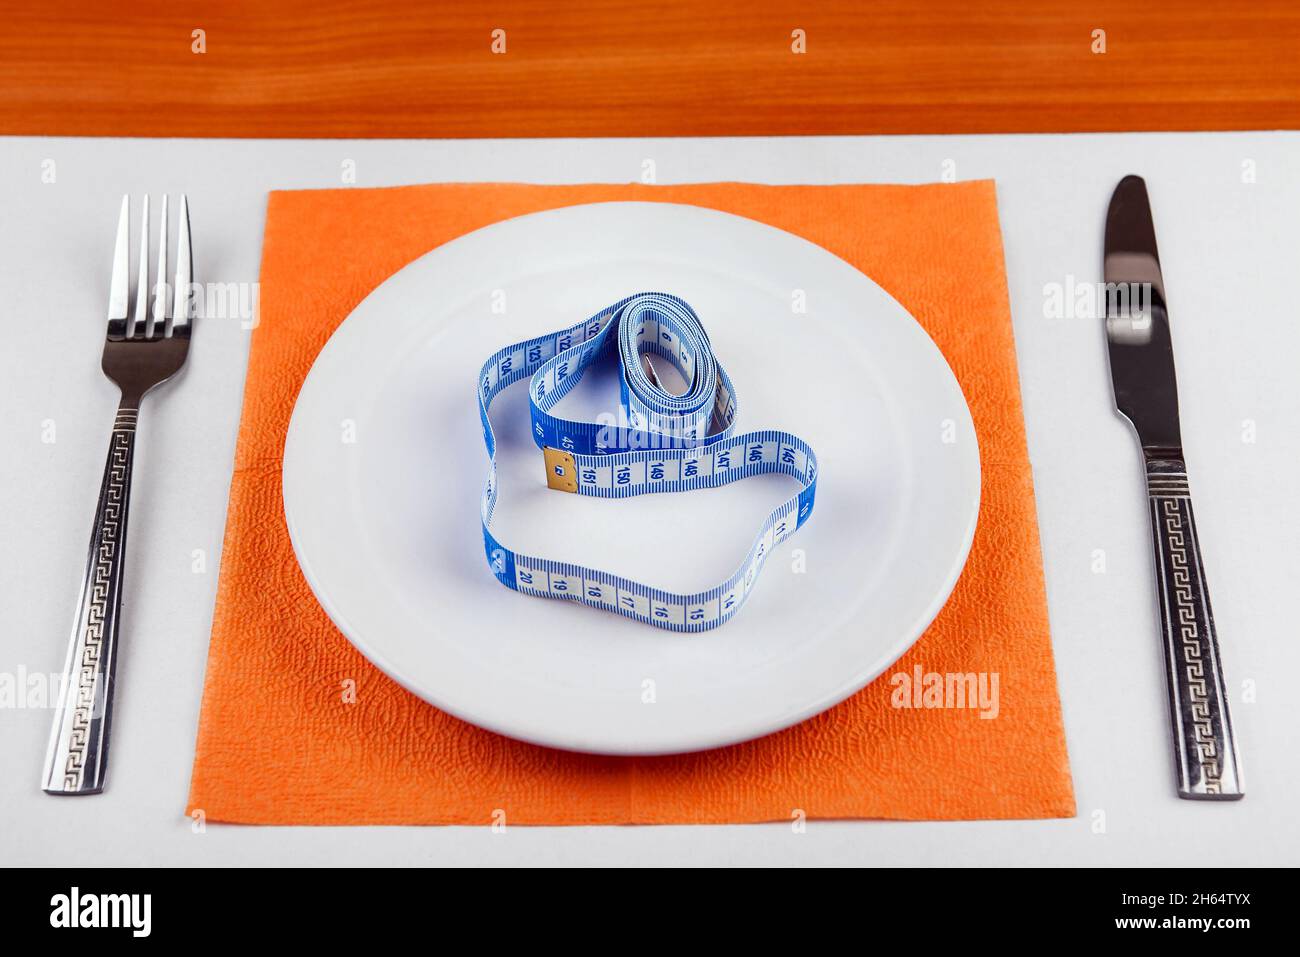 Tape Measure in the Plate on the Table Stock Photo